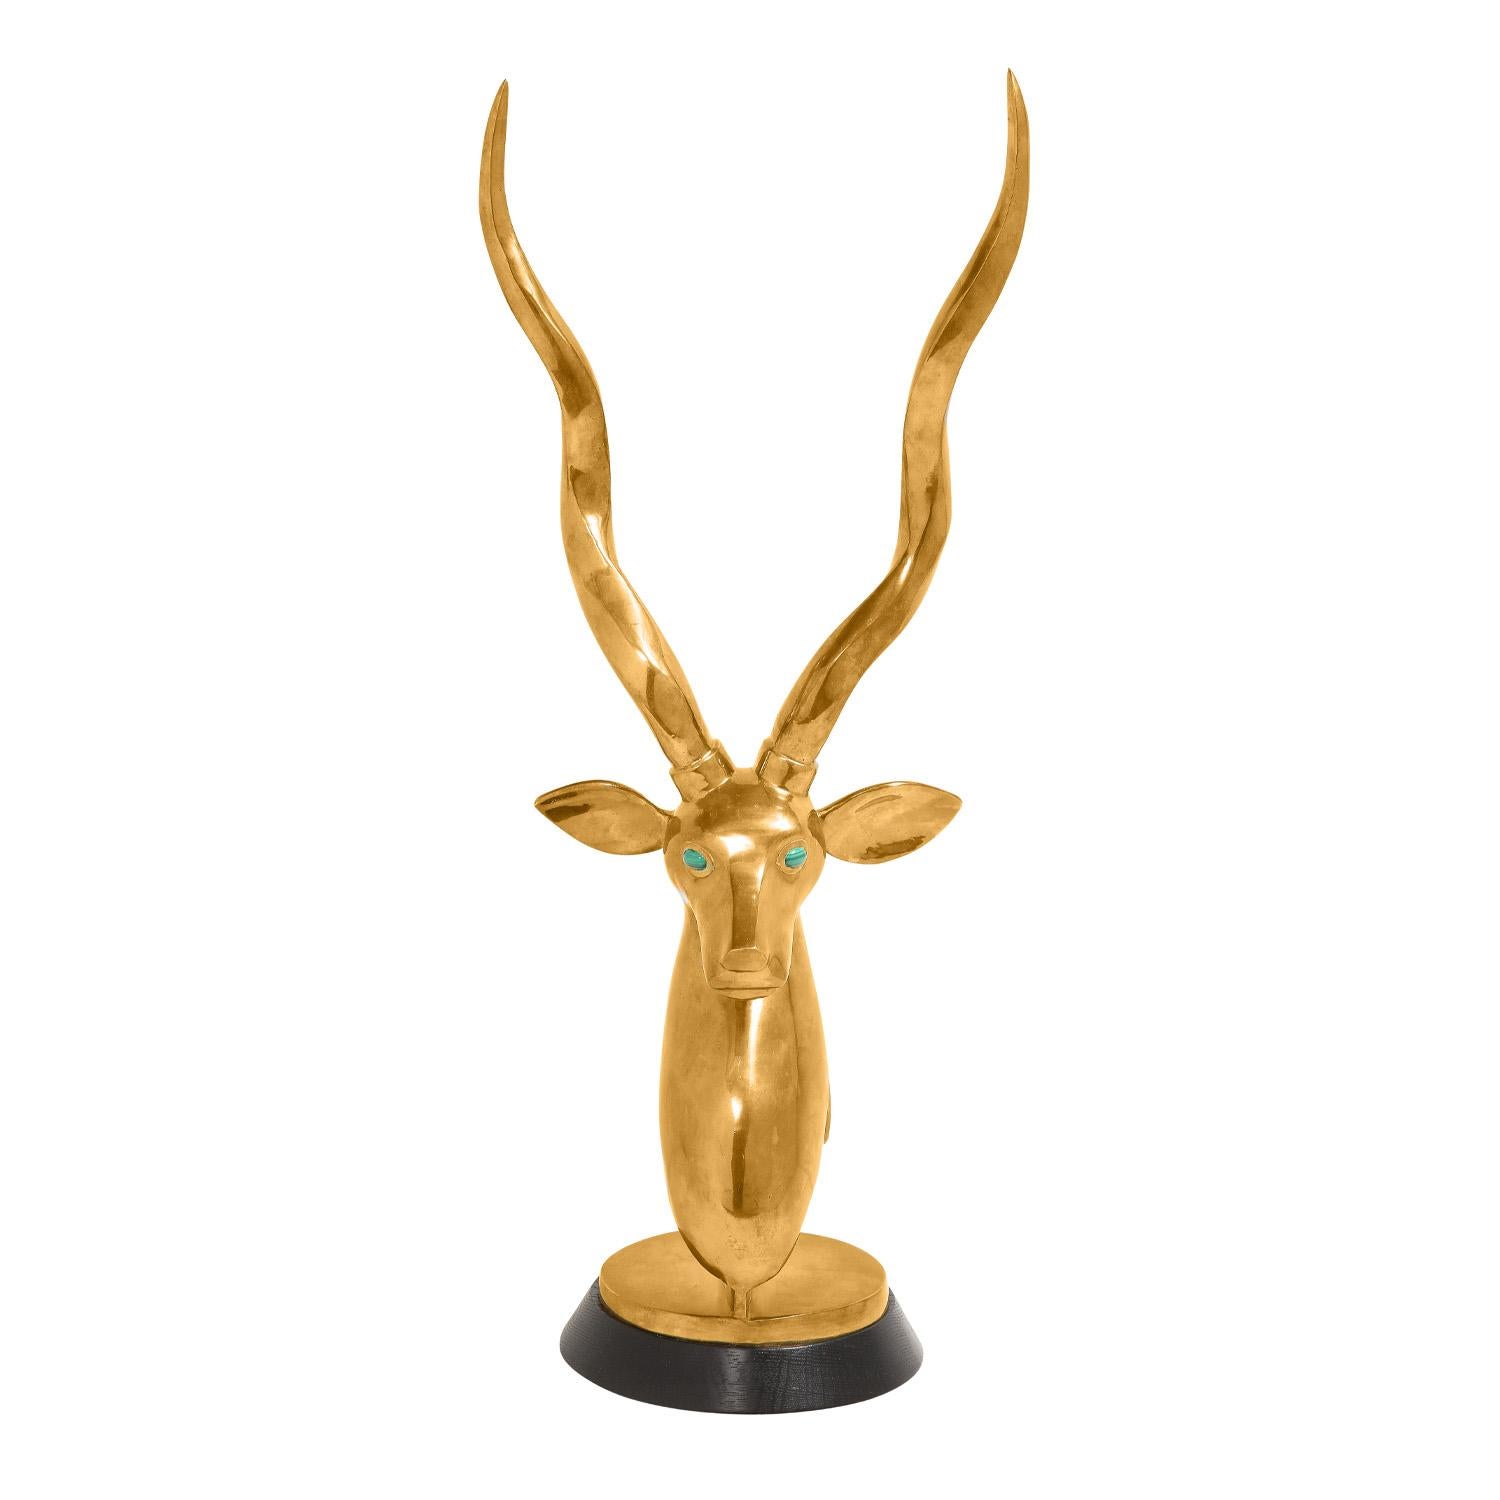 Kudu sculpture in polished brass with malachite eyes on dark wood base by Robert Estevez, American 1980's. The radiant malachite eyes set against the shimmering brass are a sight to behold. 

Roberto Estevez was an extremely talented jewelry